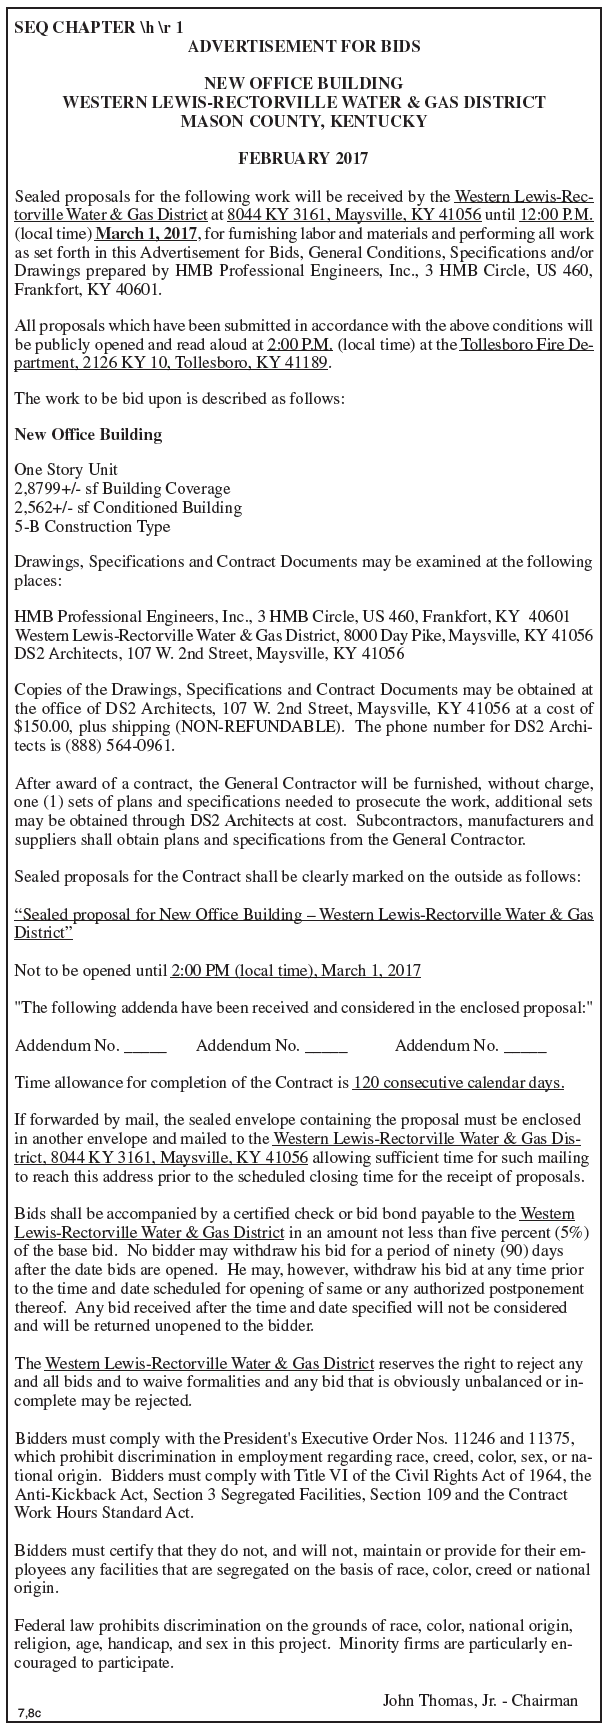 Western Lewis-Rectorville Water & Gas District, Advertisement for Bids